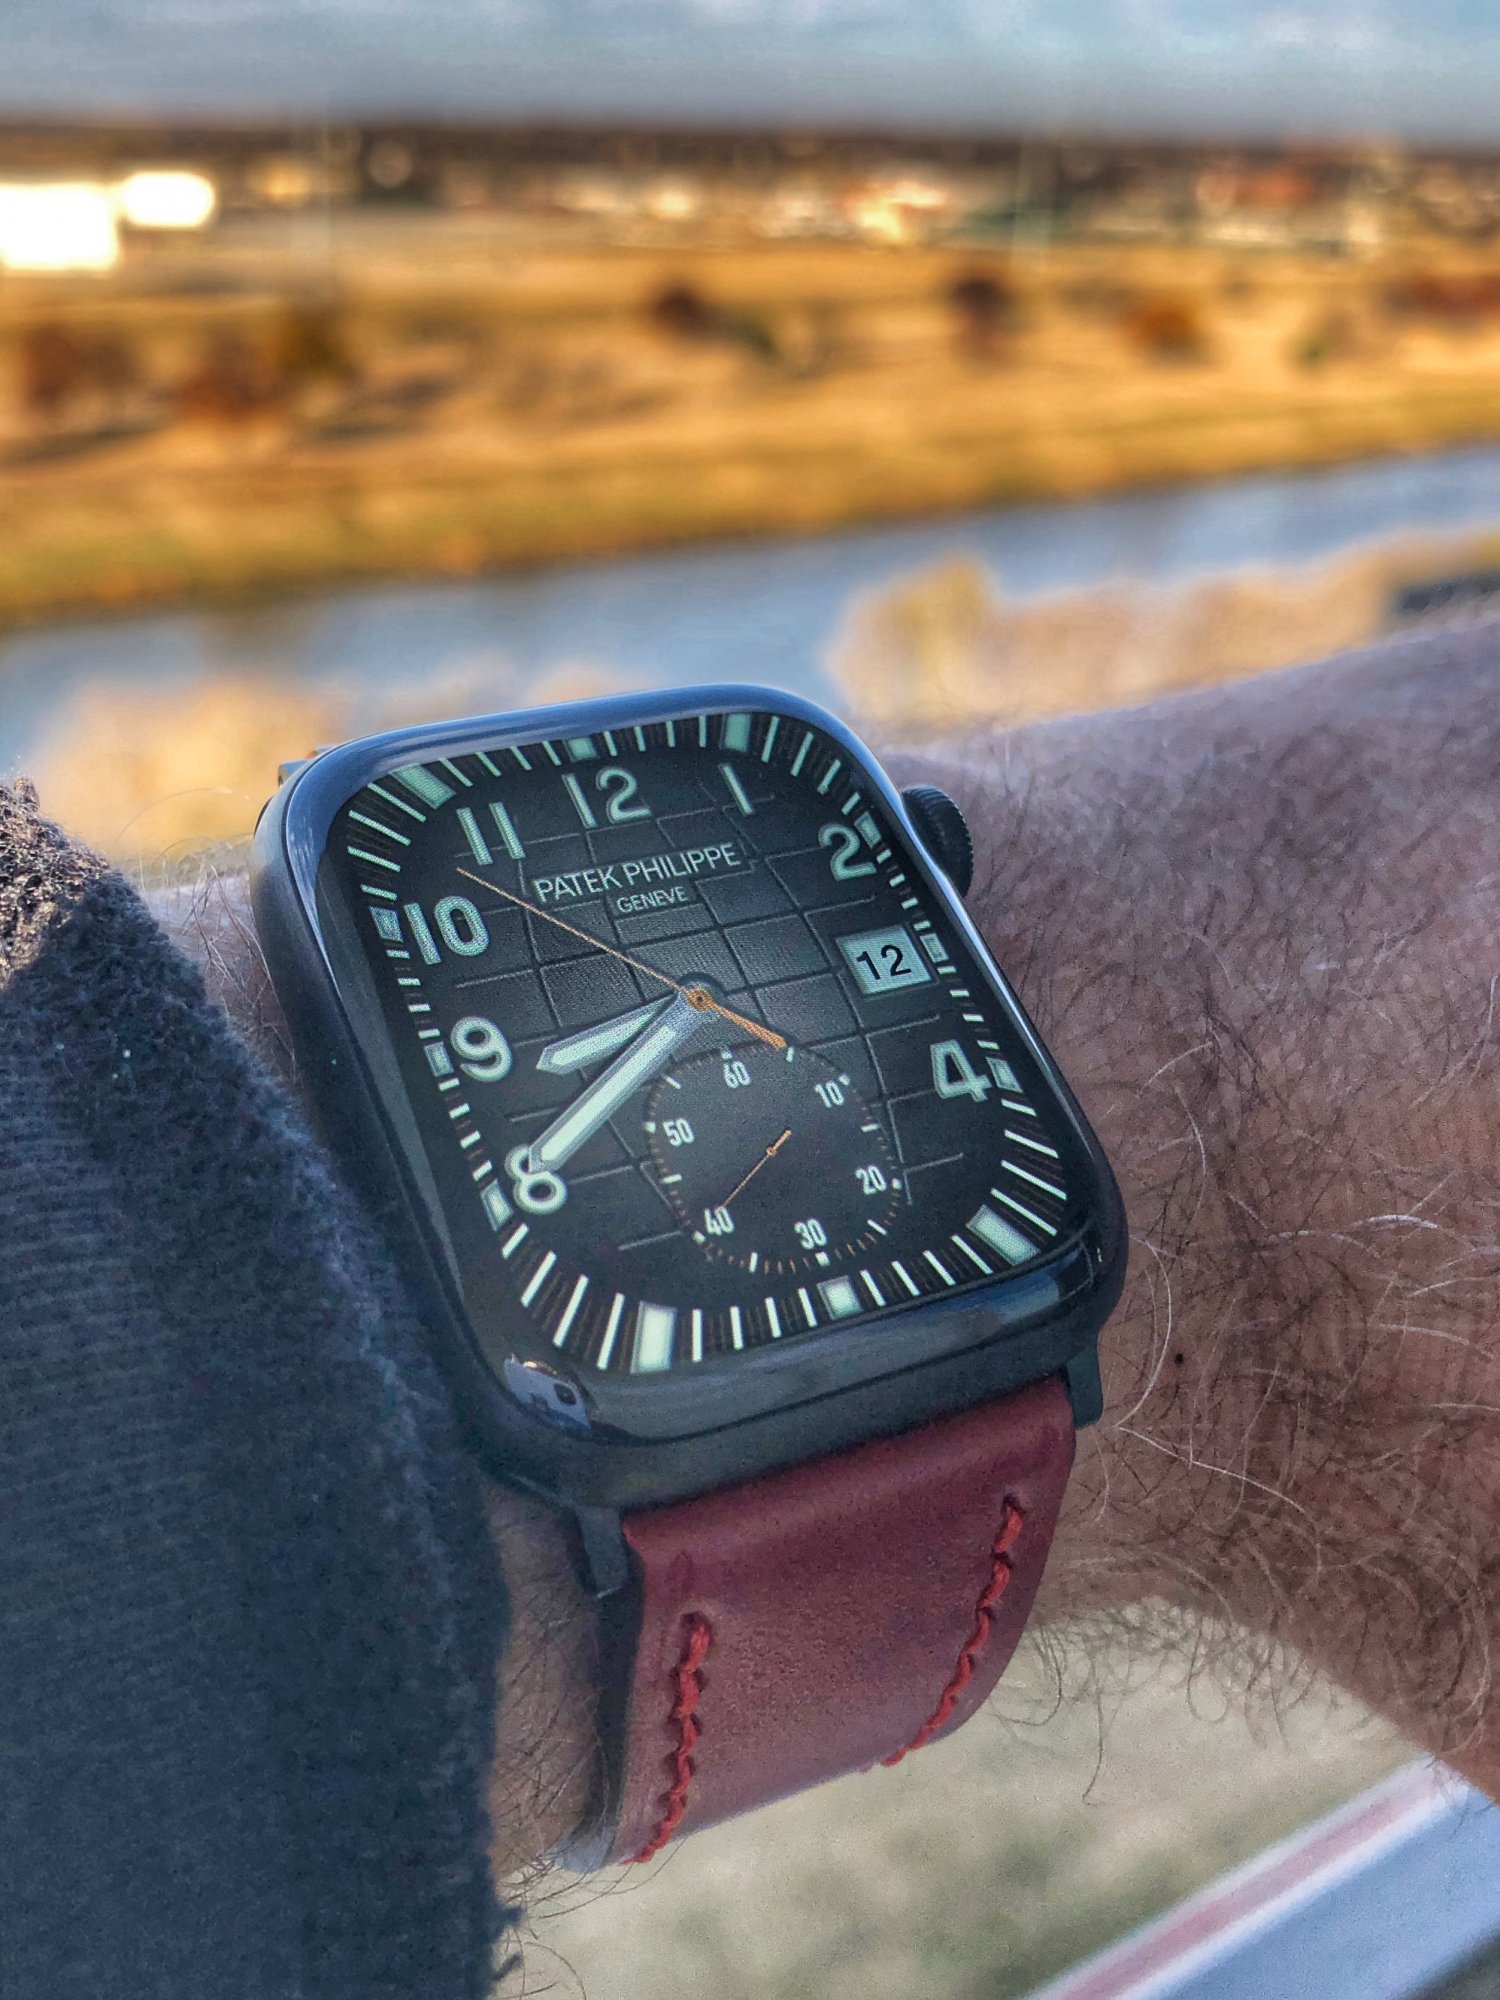 Show off your Apple Watch | Page 584 | MacRumors Forums